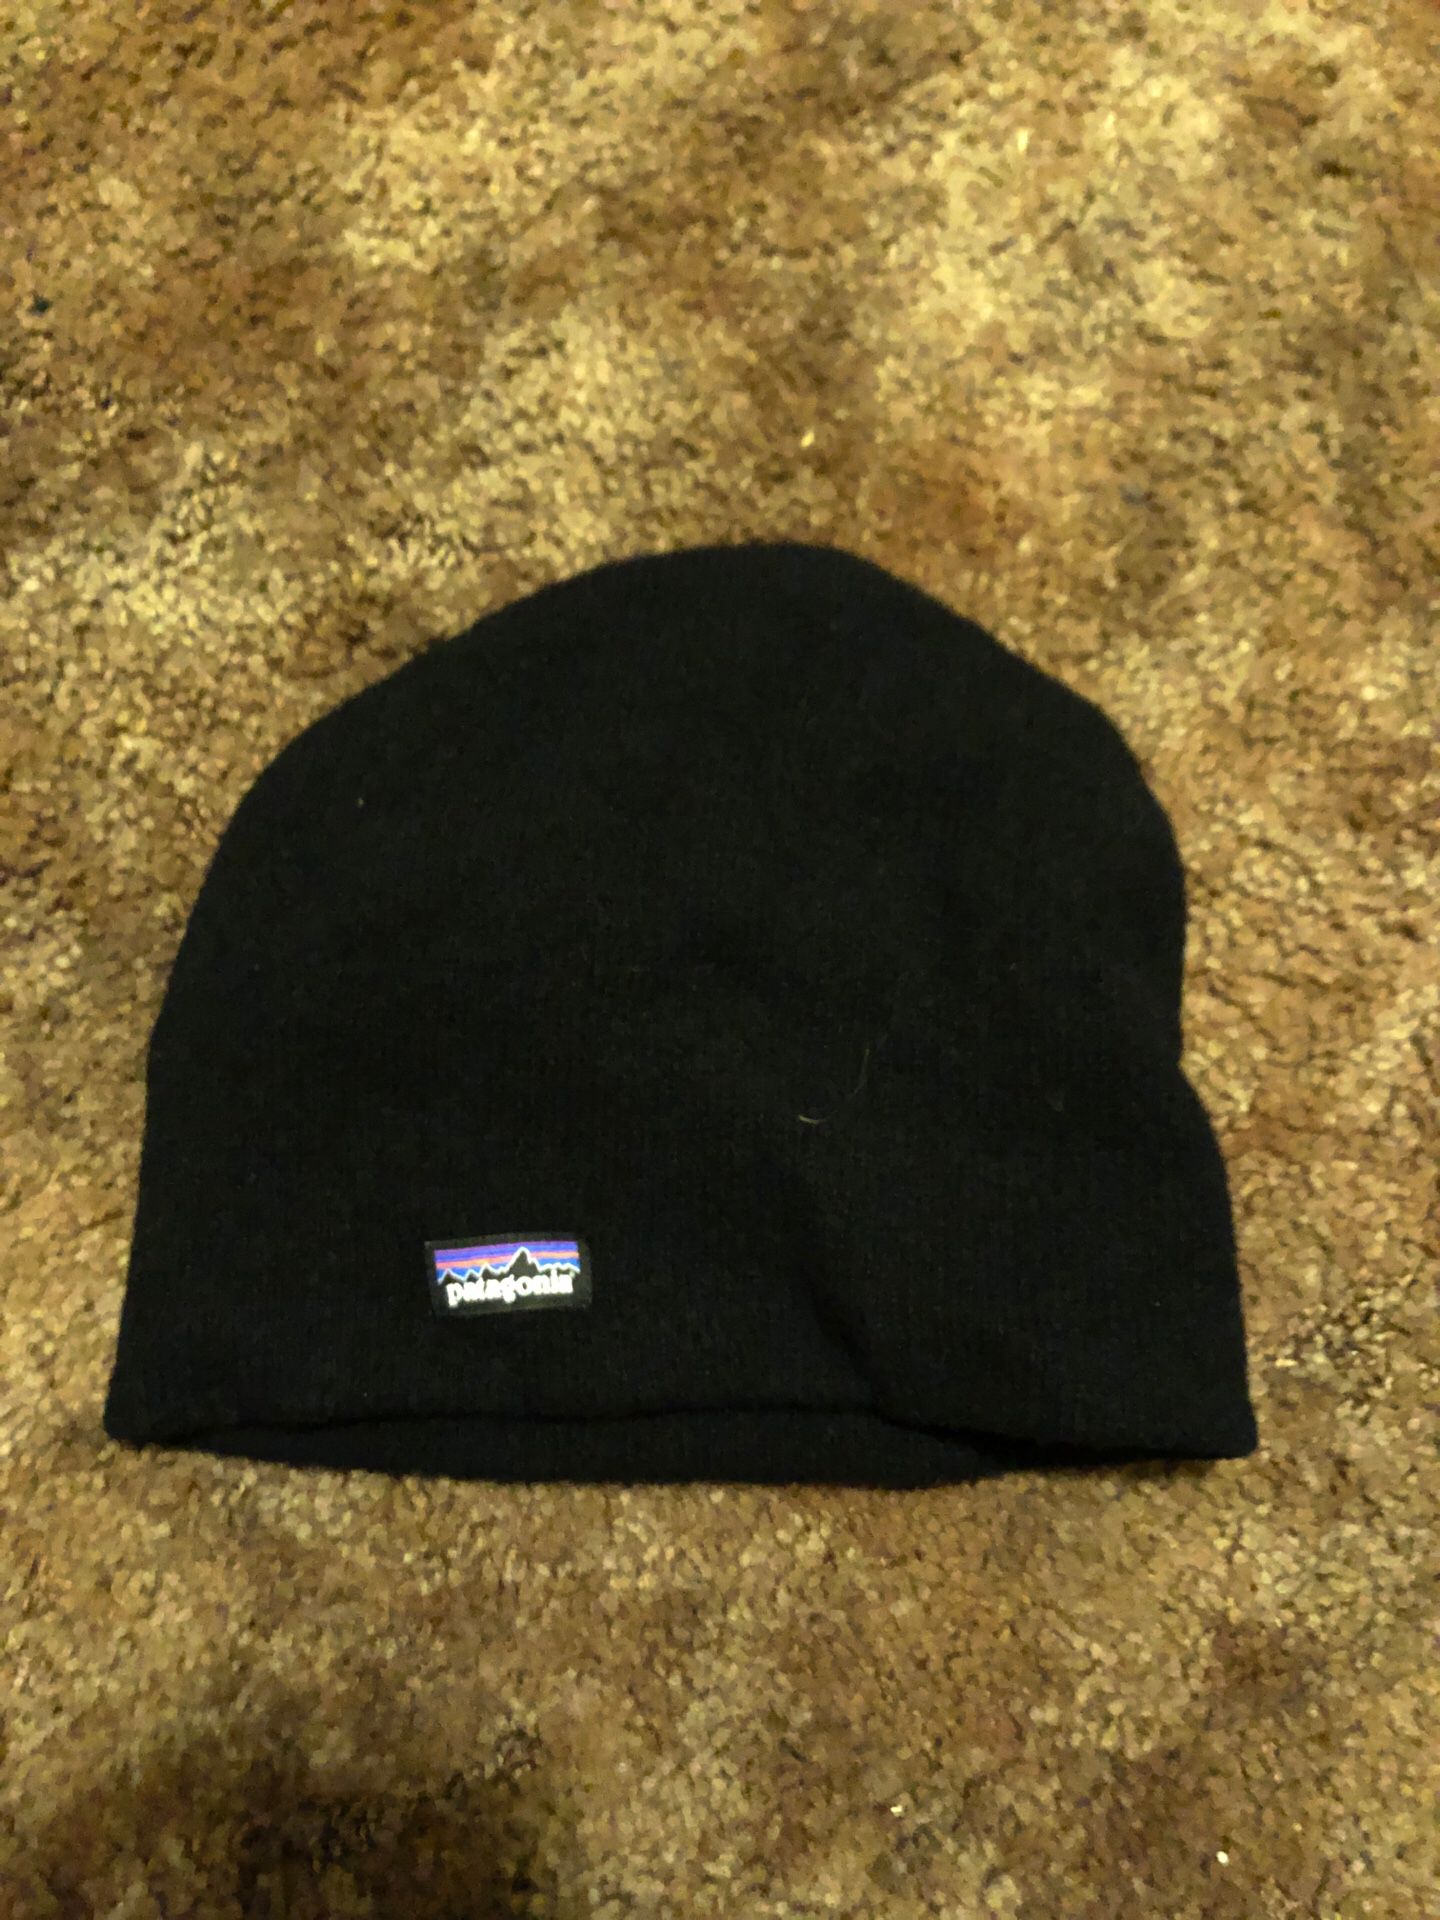 Used Patagonia Beanie washed and clean!